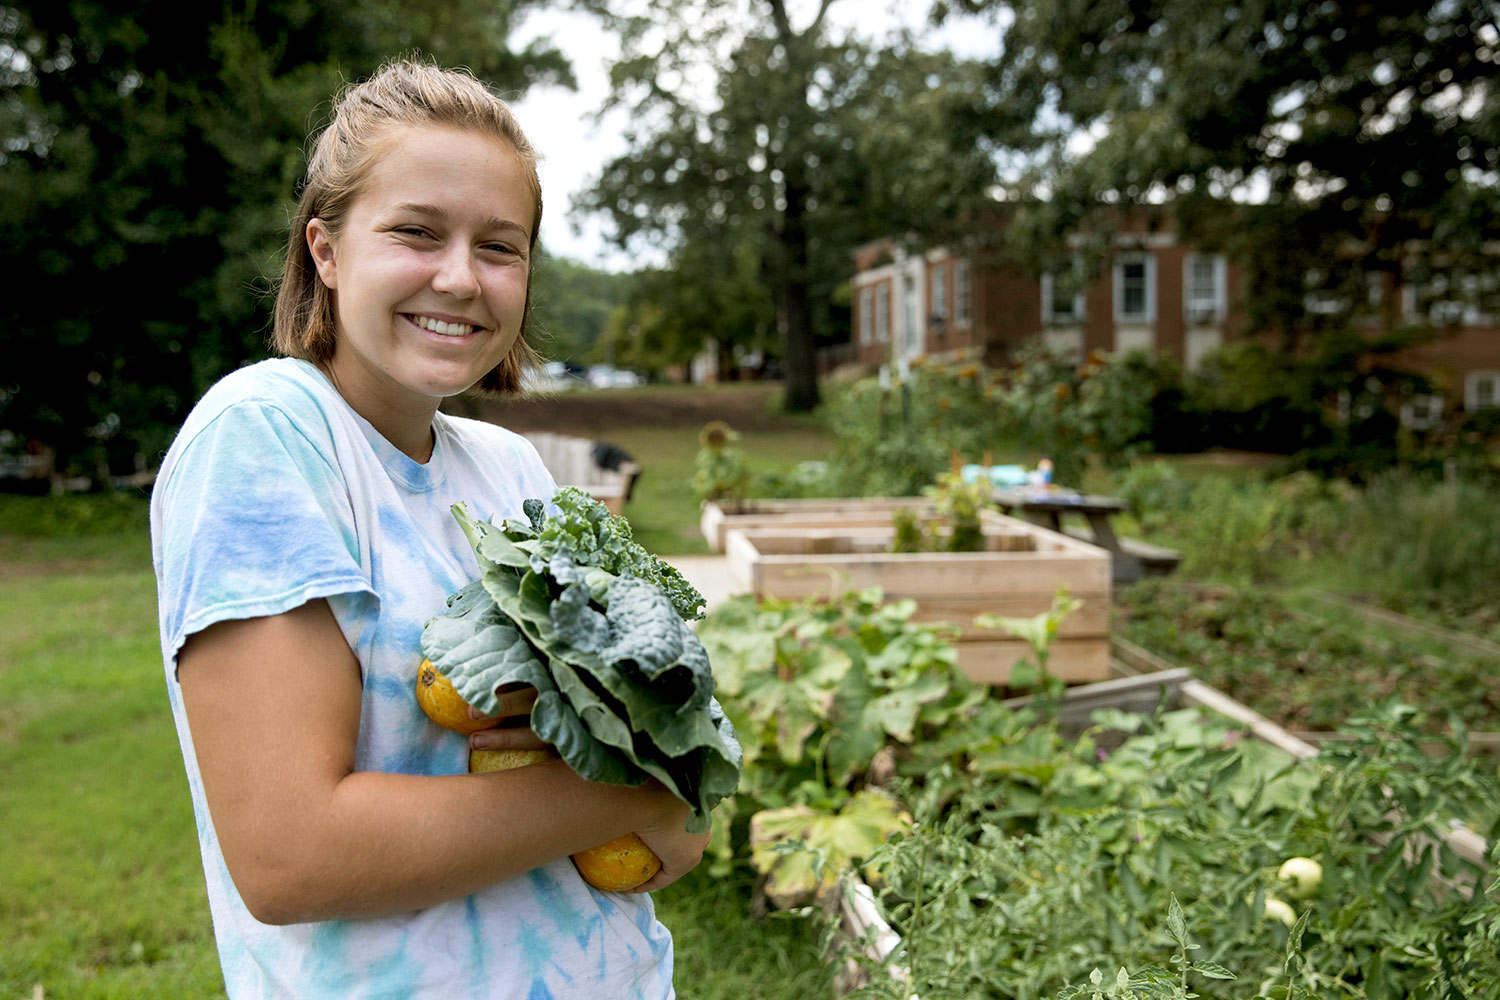 Watt says that once she discovered the community garden, it quickly became one of her favorite spots on Grounds. 